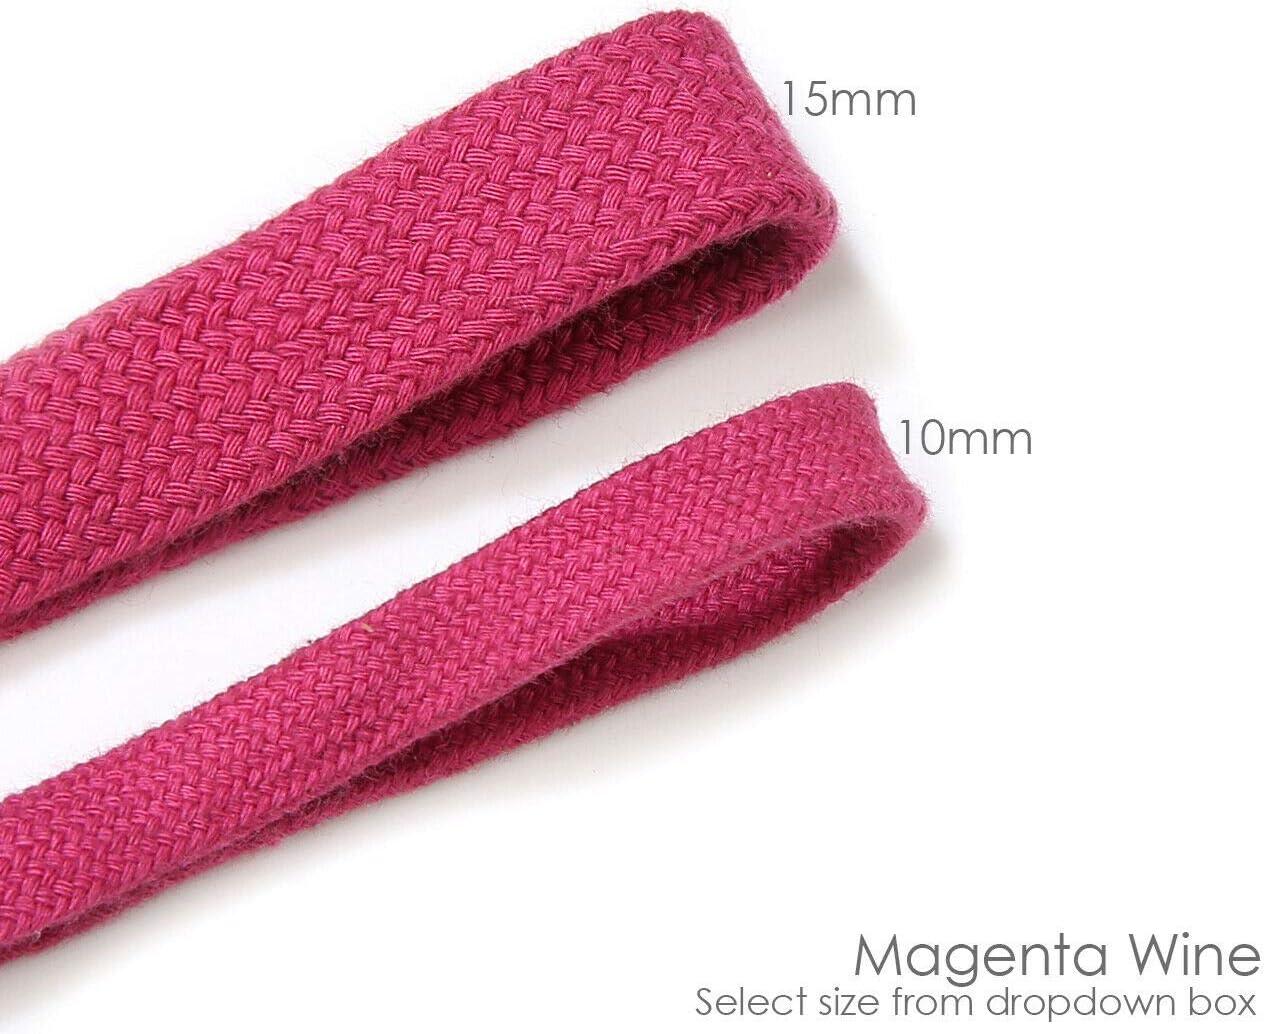 Sweatshirt Hoodie Flat Cotton Tape Ribbon Cord Rope,10 & 15mm,Garment Hoody  Drawstring. 26 Colours, 1mt, 5mts, 25mts and 45mts Rolls. Colours Match  Neotrims Flanged 12mm Piping and 6mm Round Cord Magenta Wine